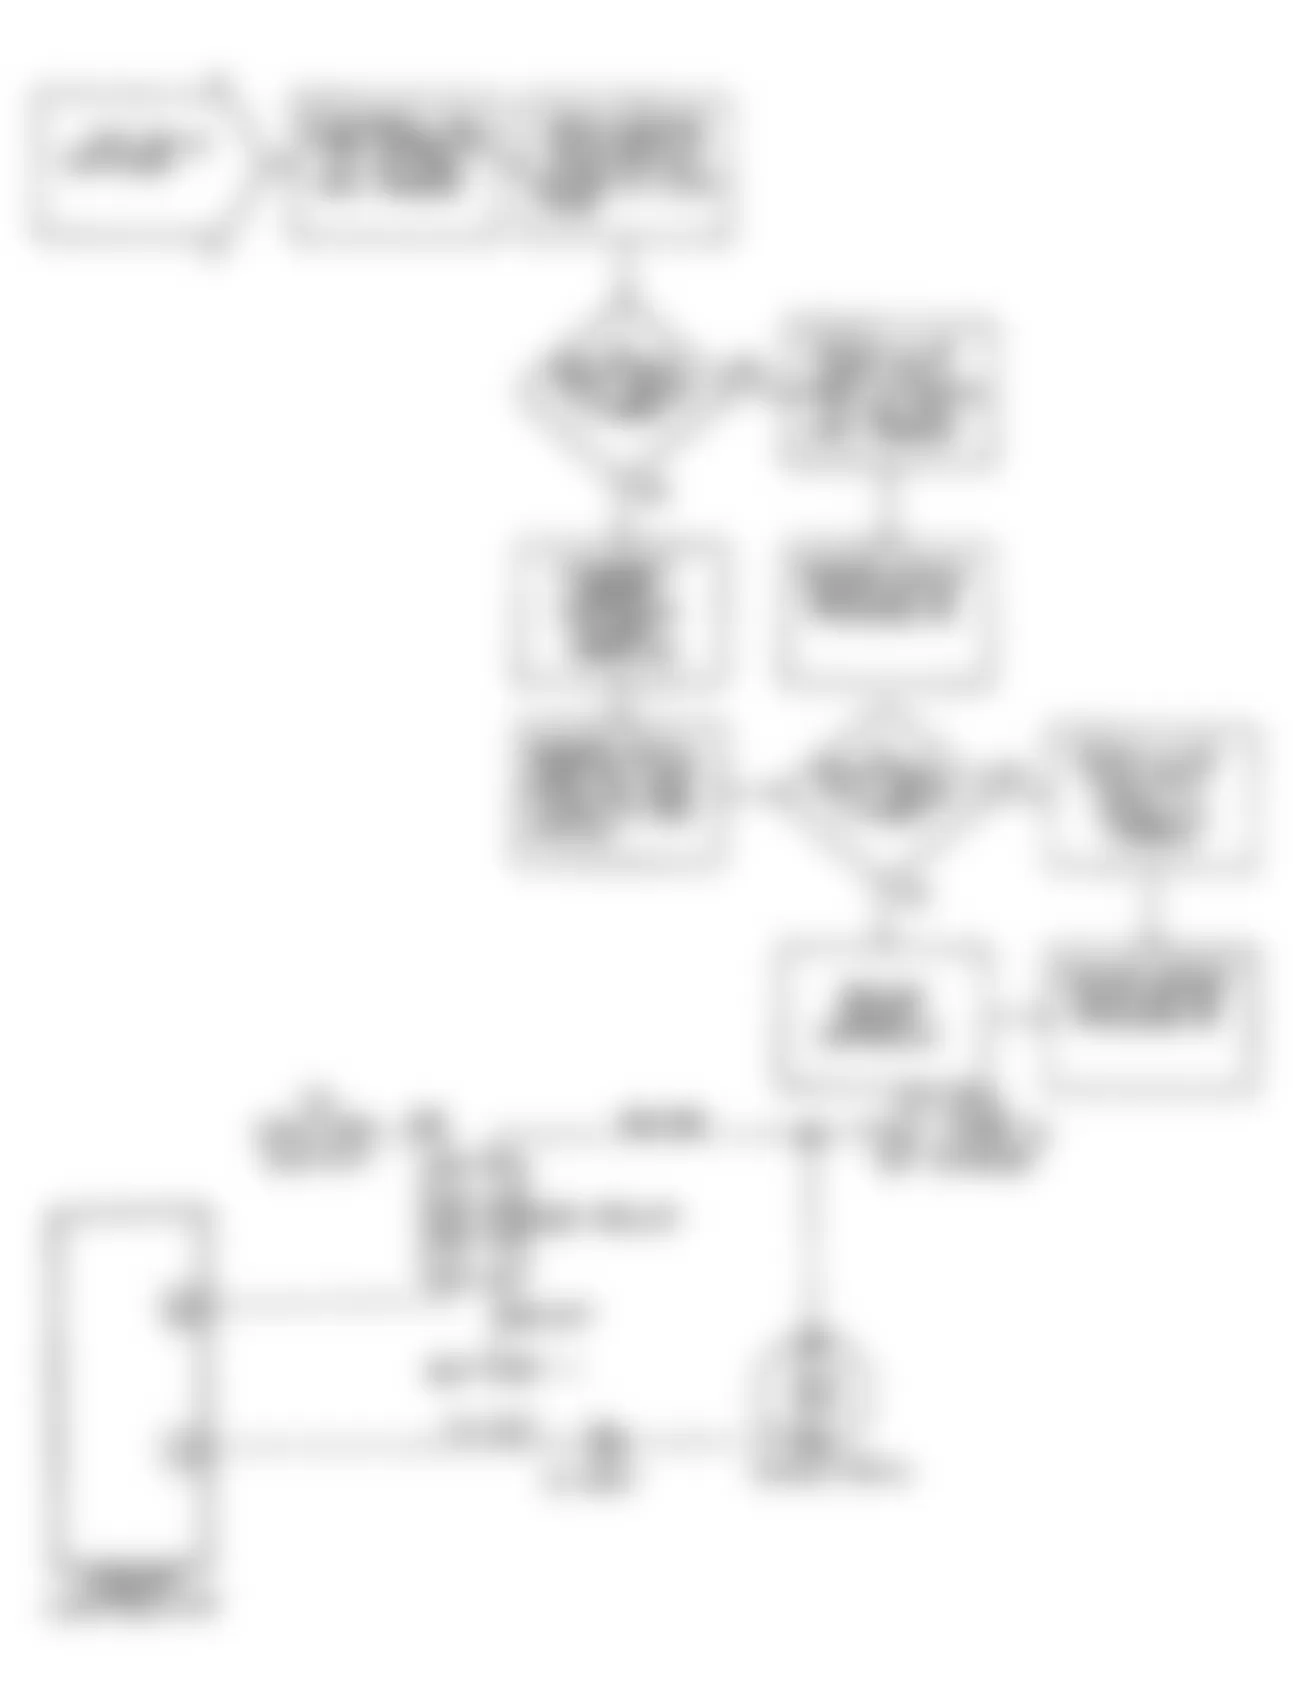 Dodge Daytona Shelby 1990 - Component Locations -  DR-18: Flow Chart (2 of 2)